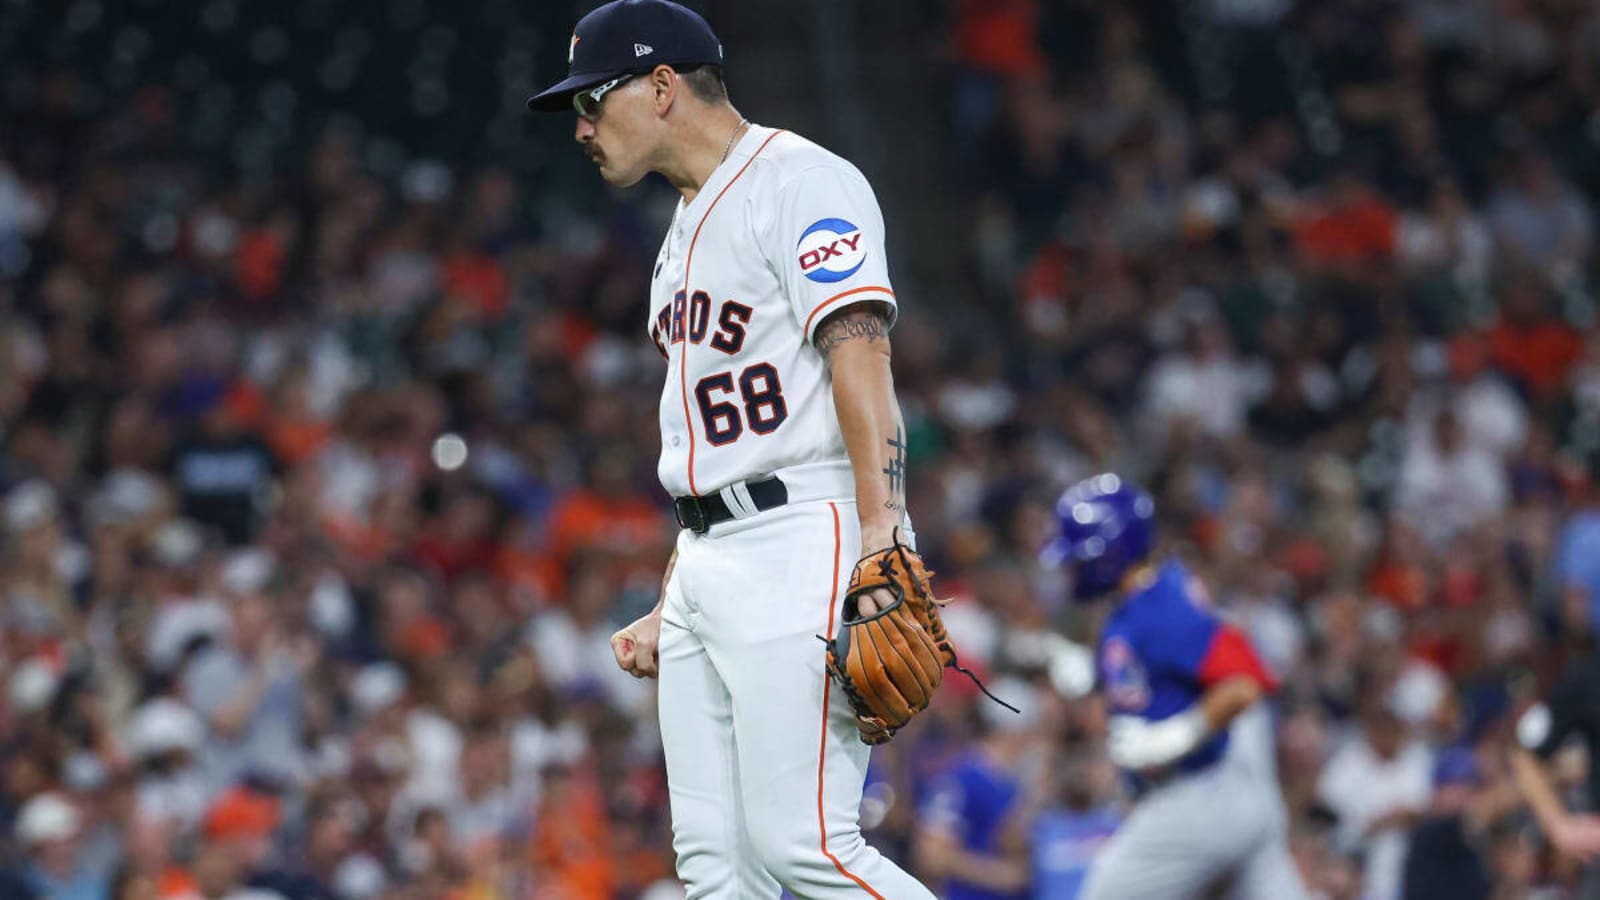 Was Astros Starter France Tipping Pitches Against Cubs?